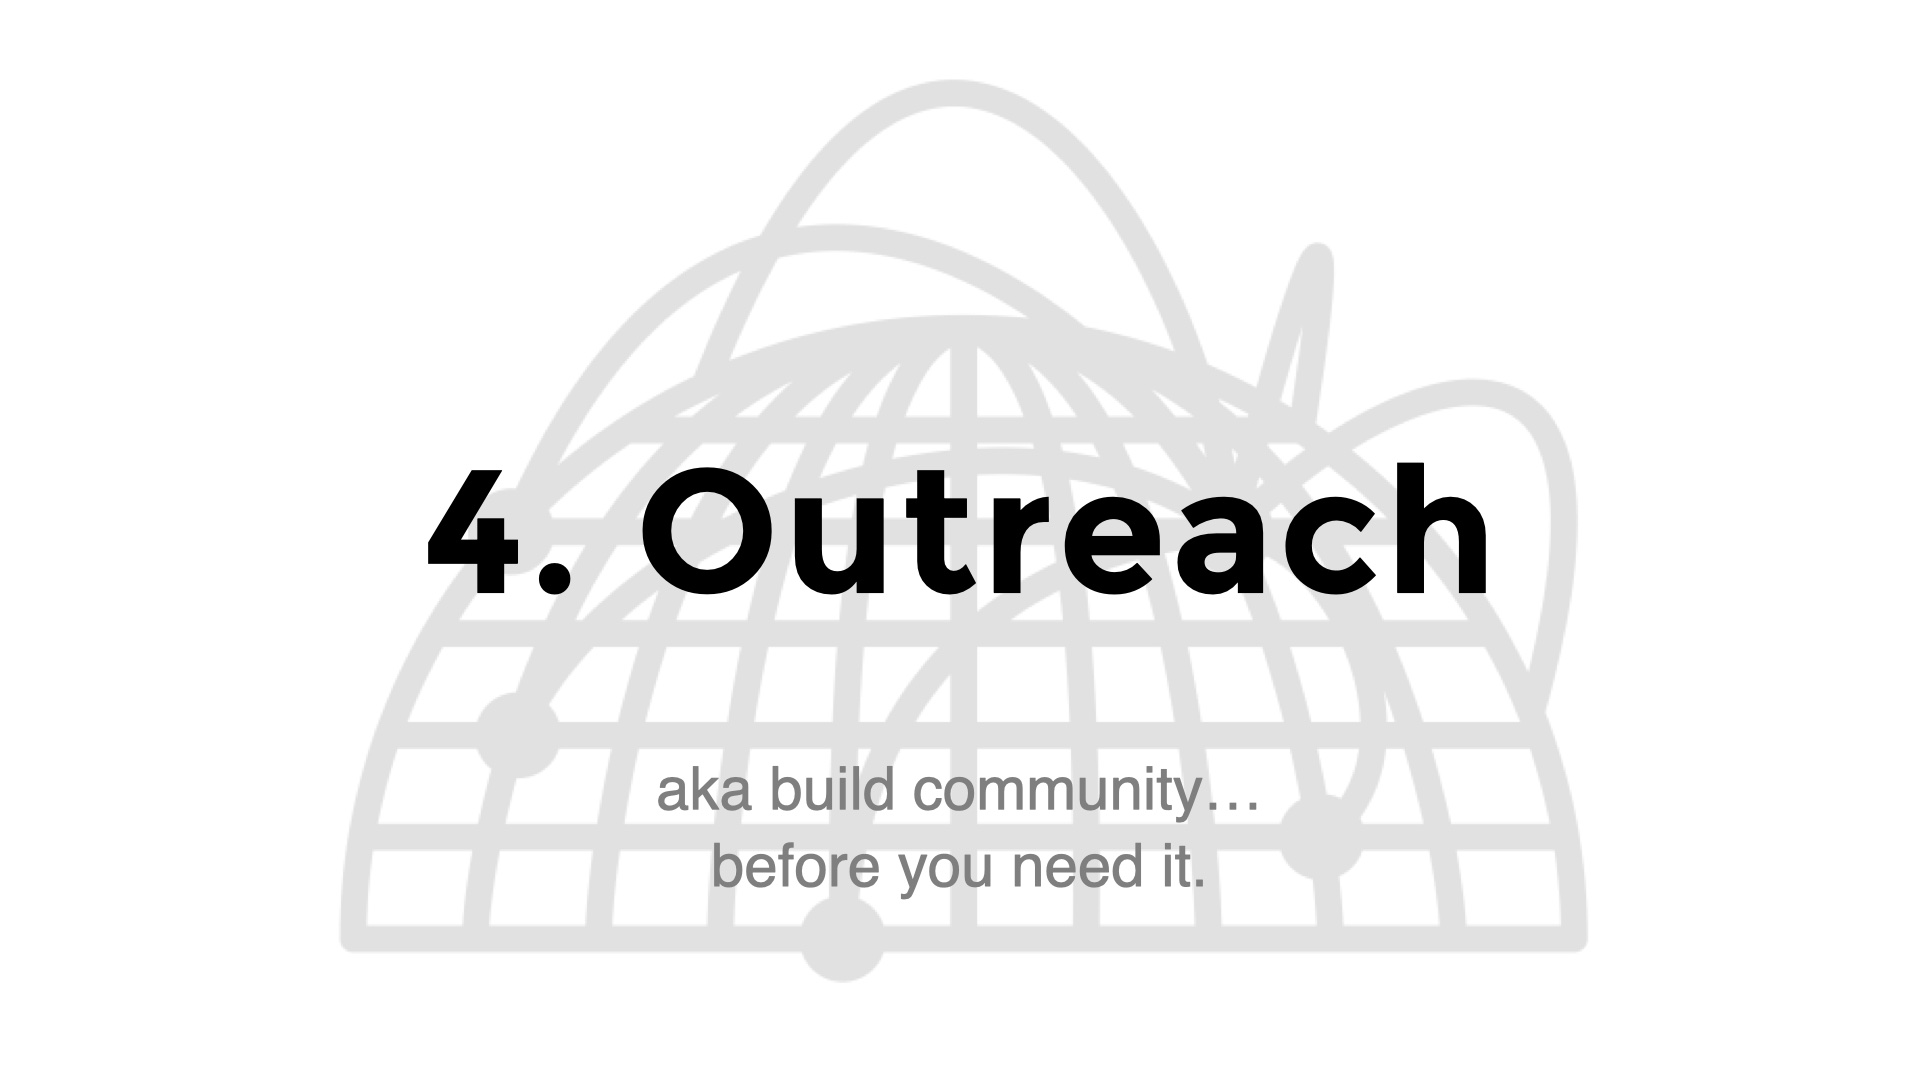 Title slide: 4. Outreach. Subtitle: aka build community…
before you need it.